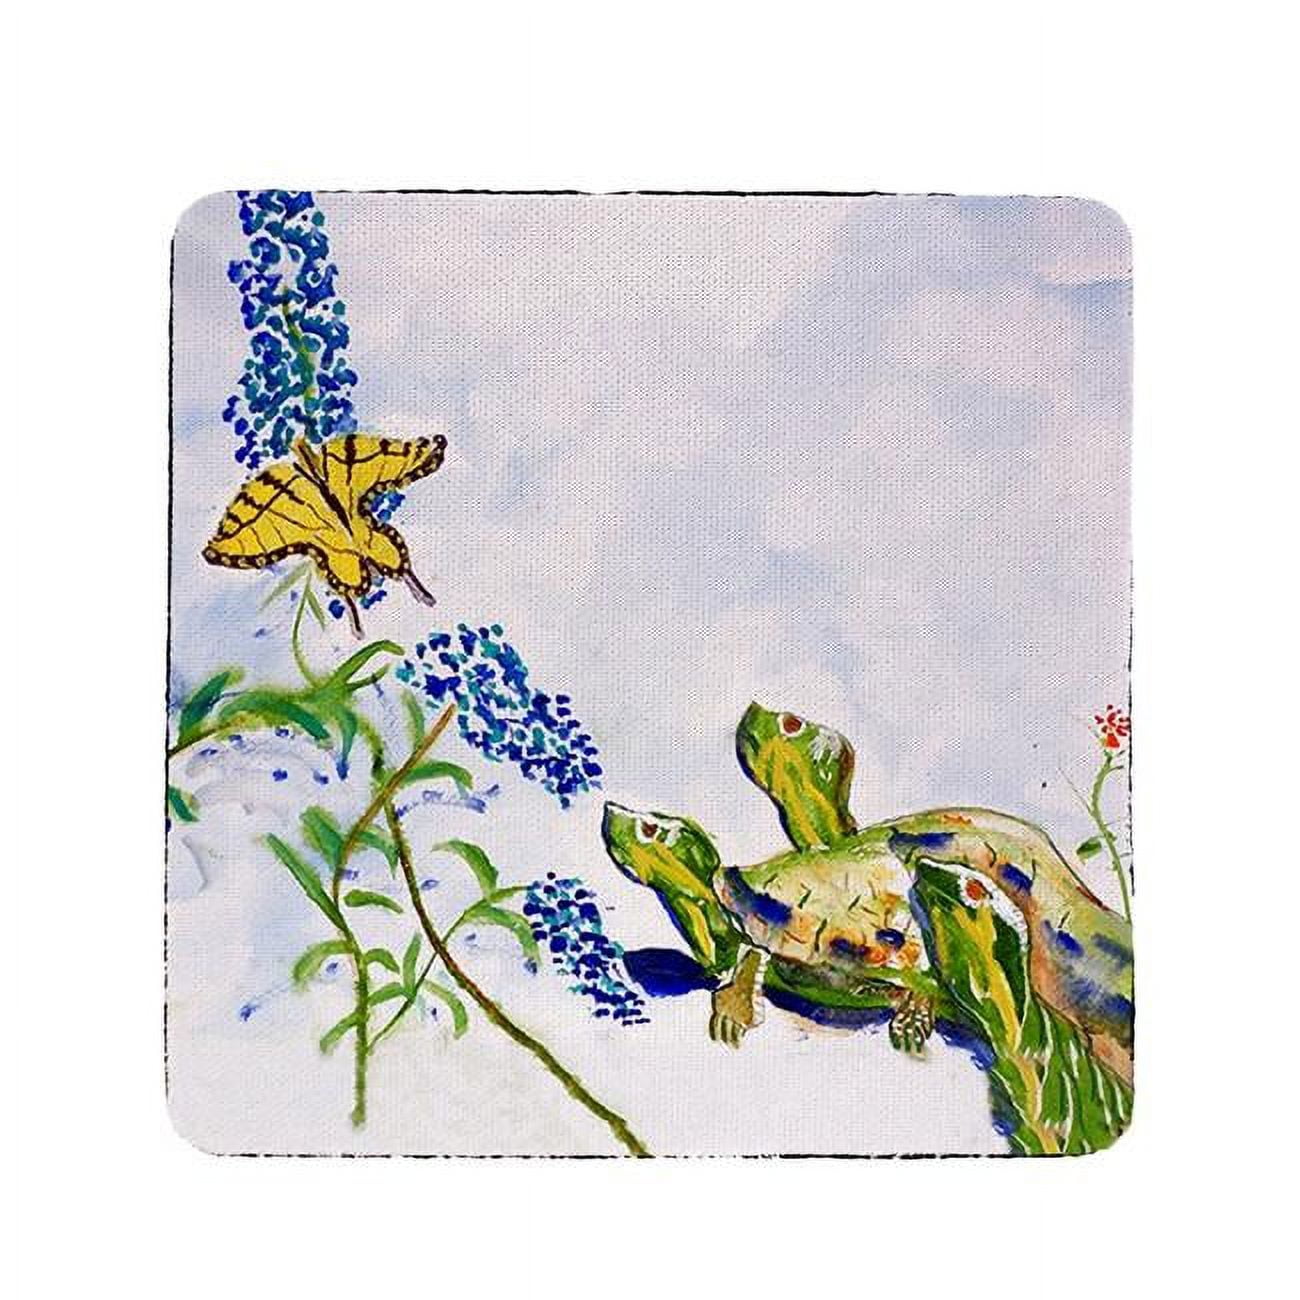 Ct178 Turtles & Butterfly Coaster - Set Of 4